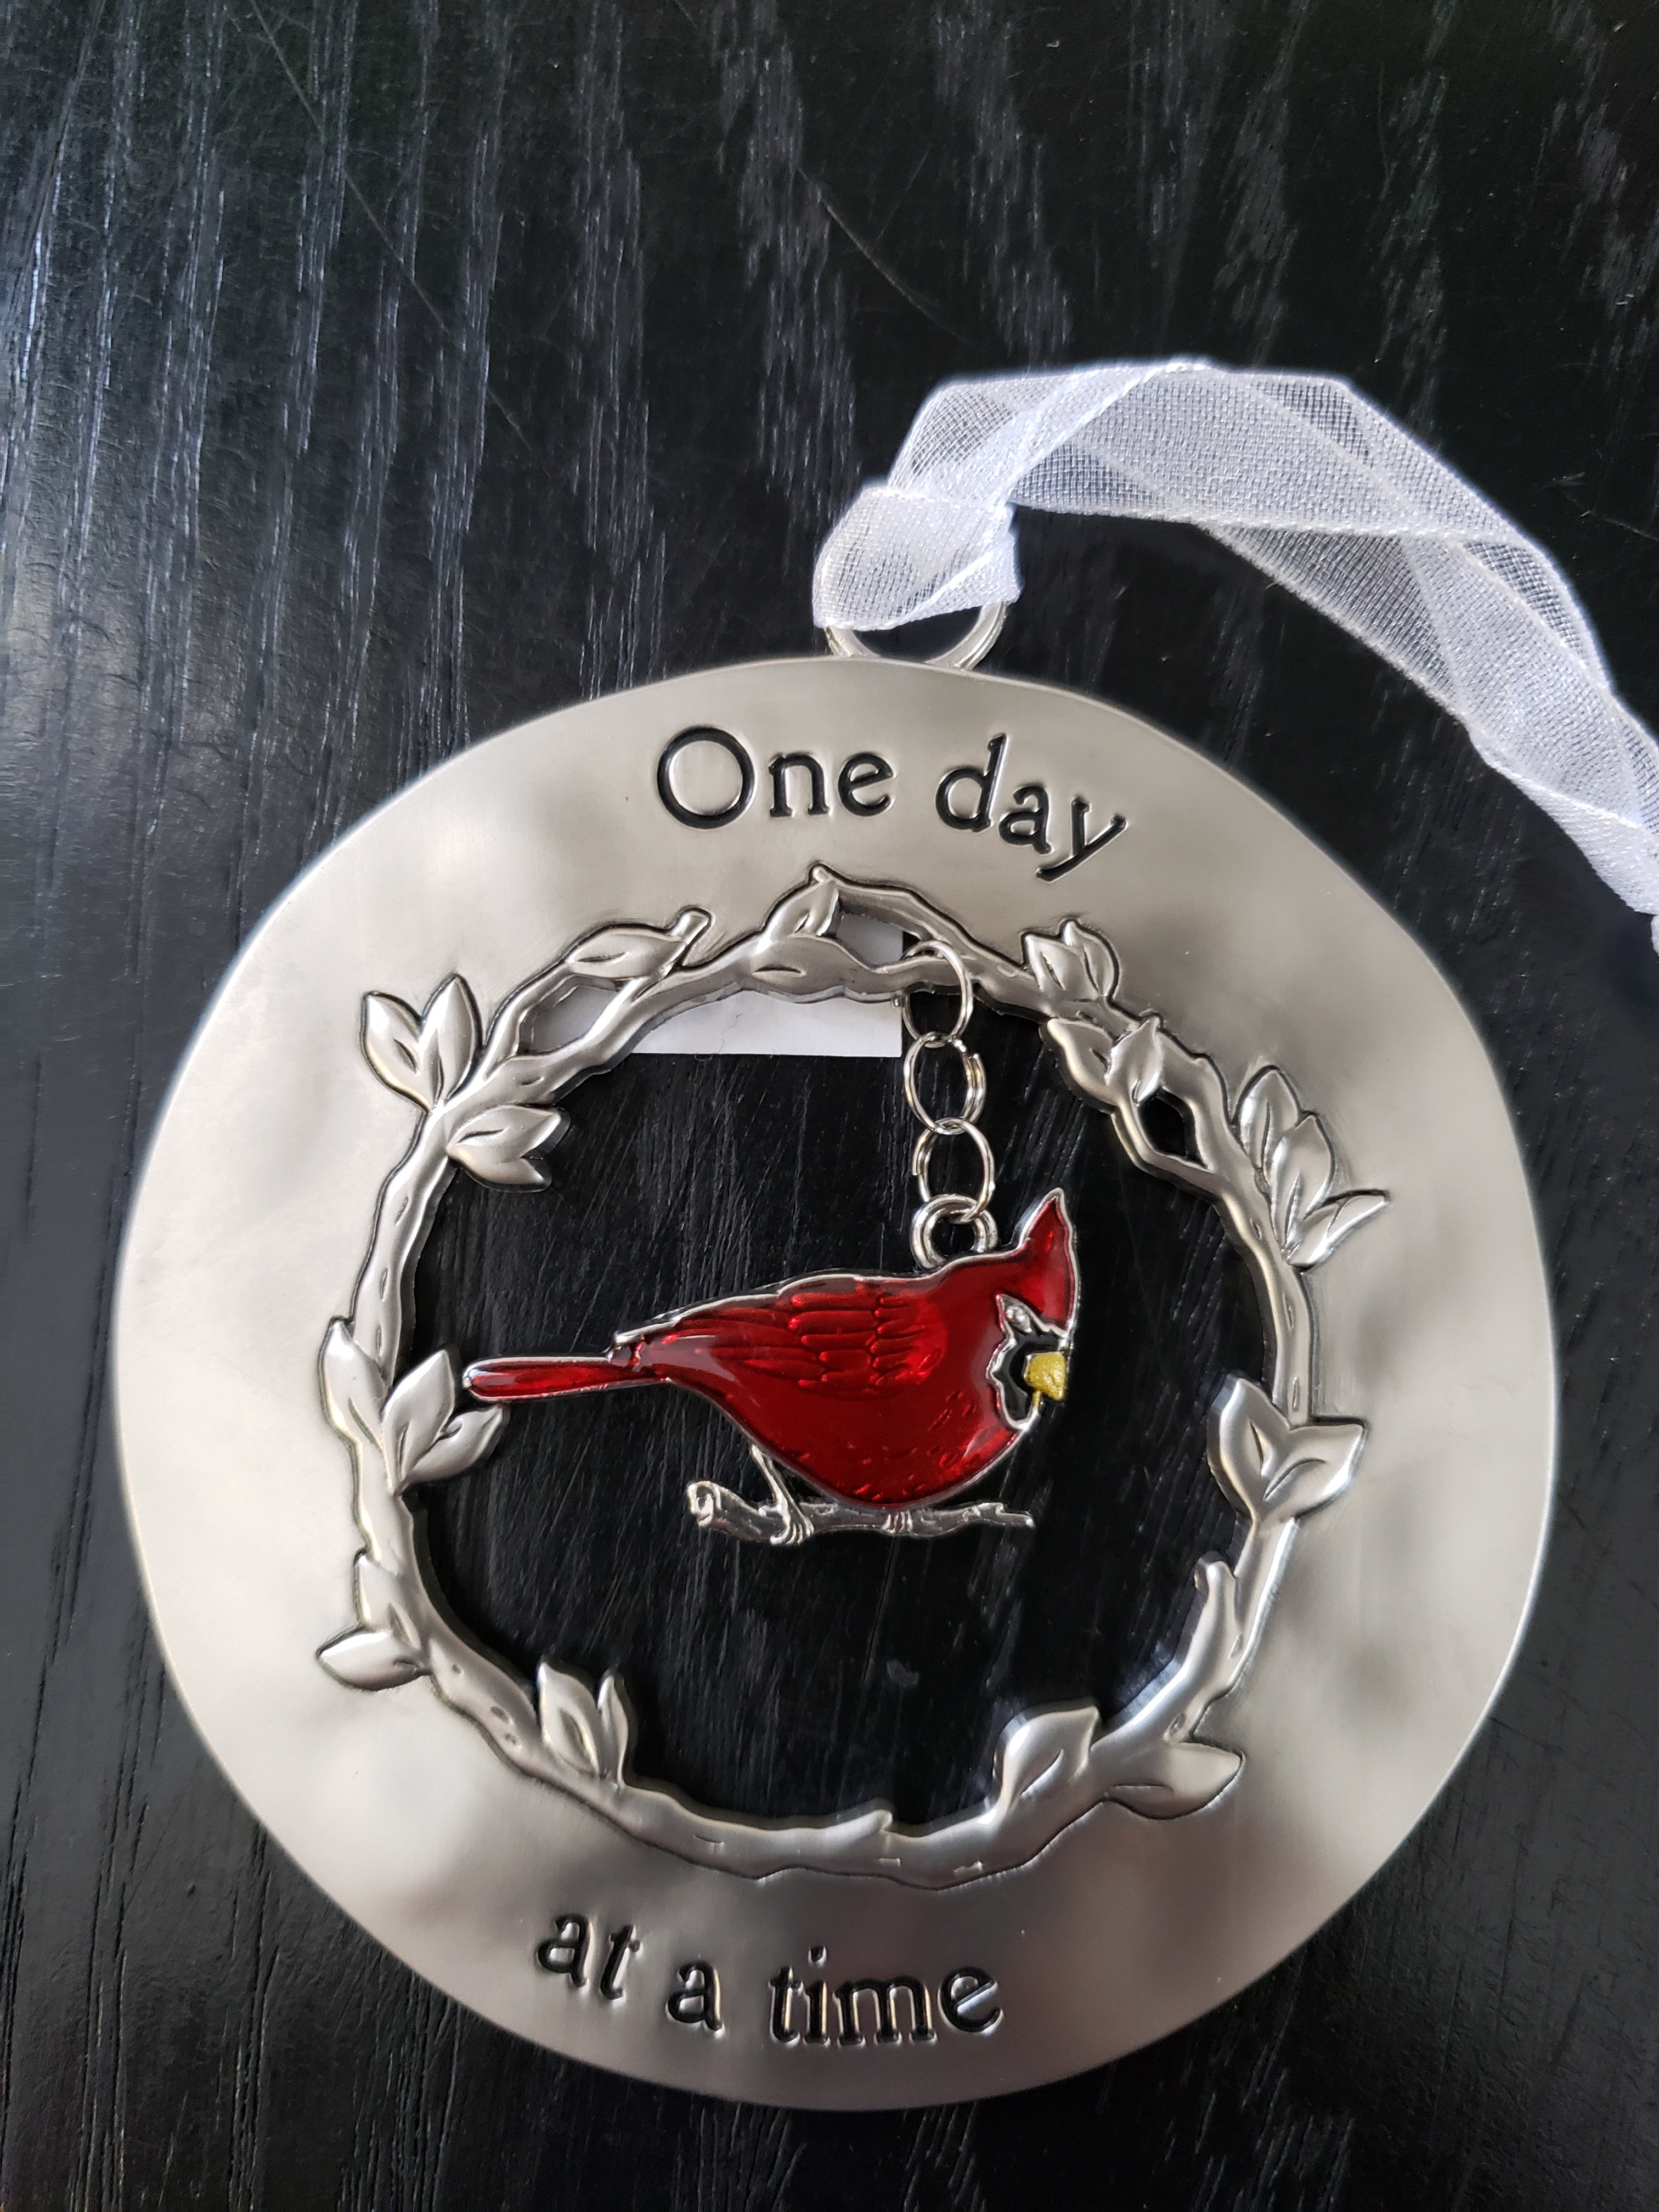 One day ornament